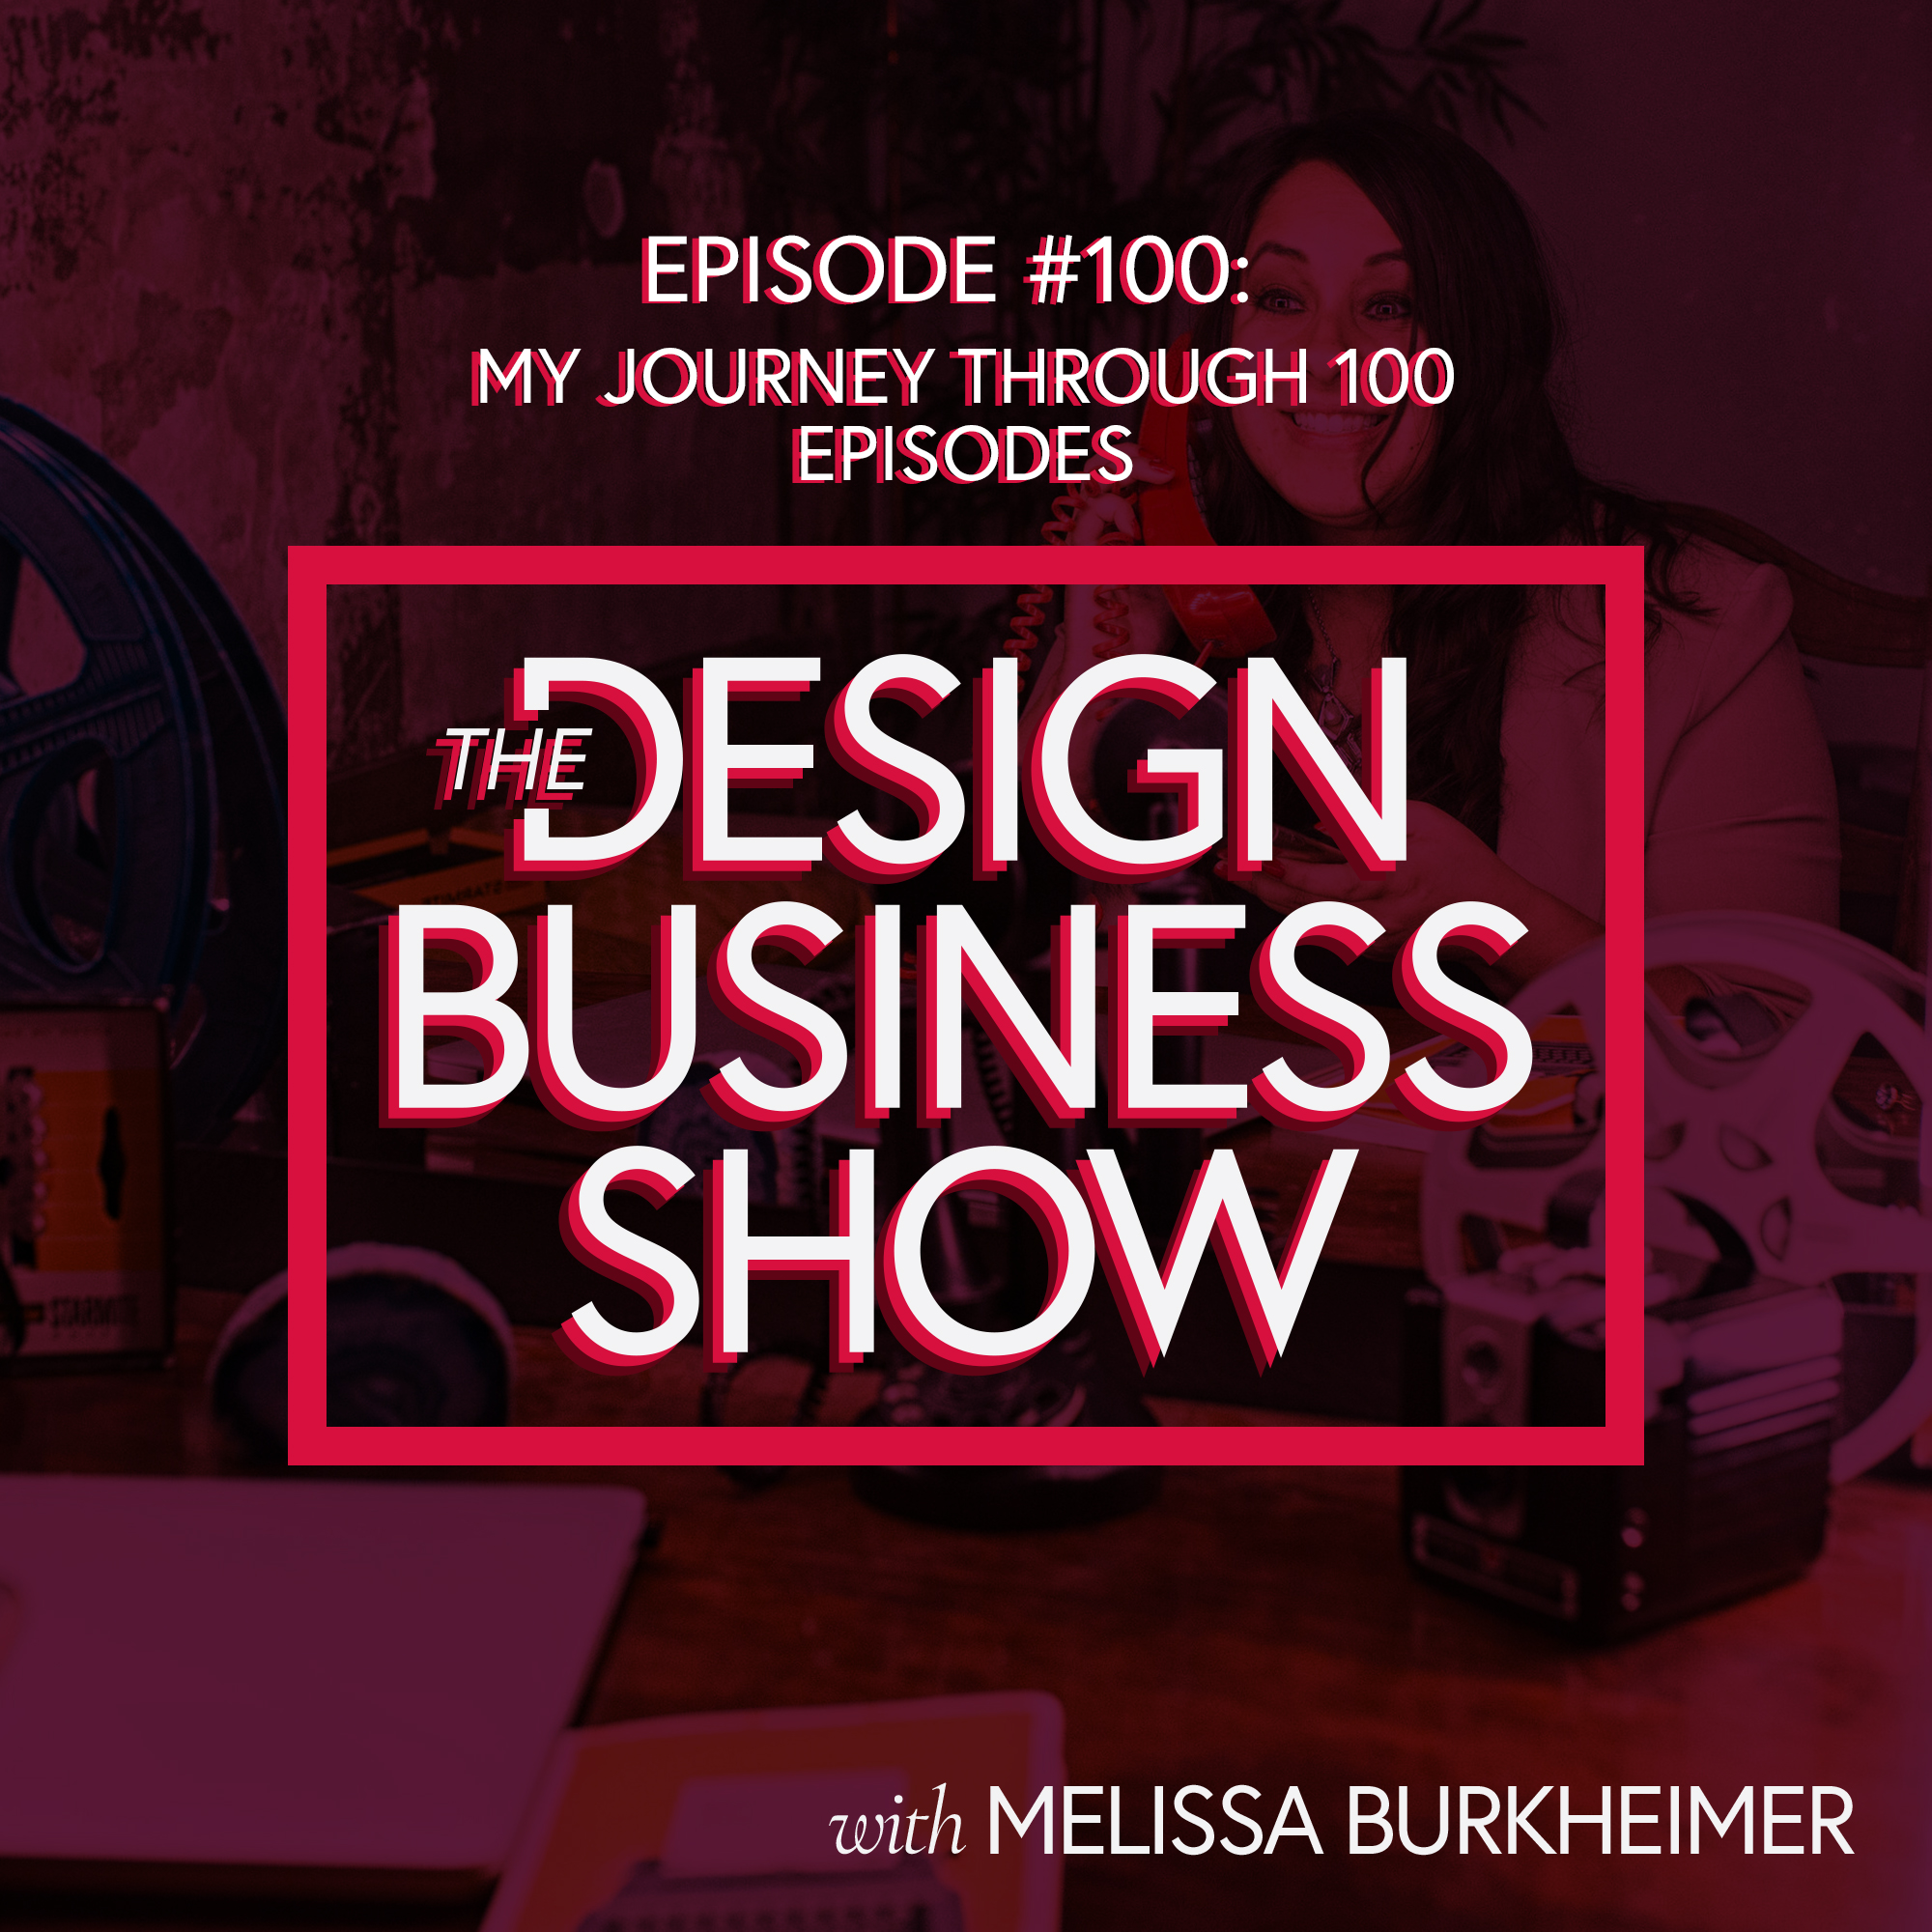 Check out episode 100 of The Design Business Show to learn about my journey through 100 episodes and my insight on the design world.